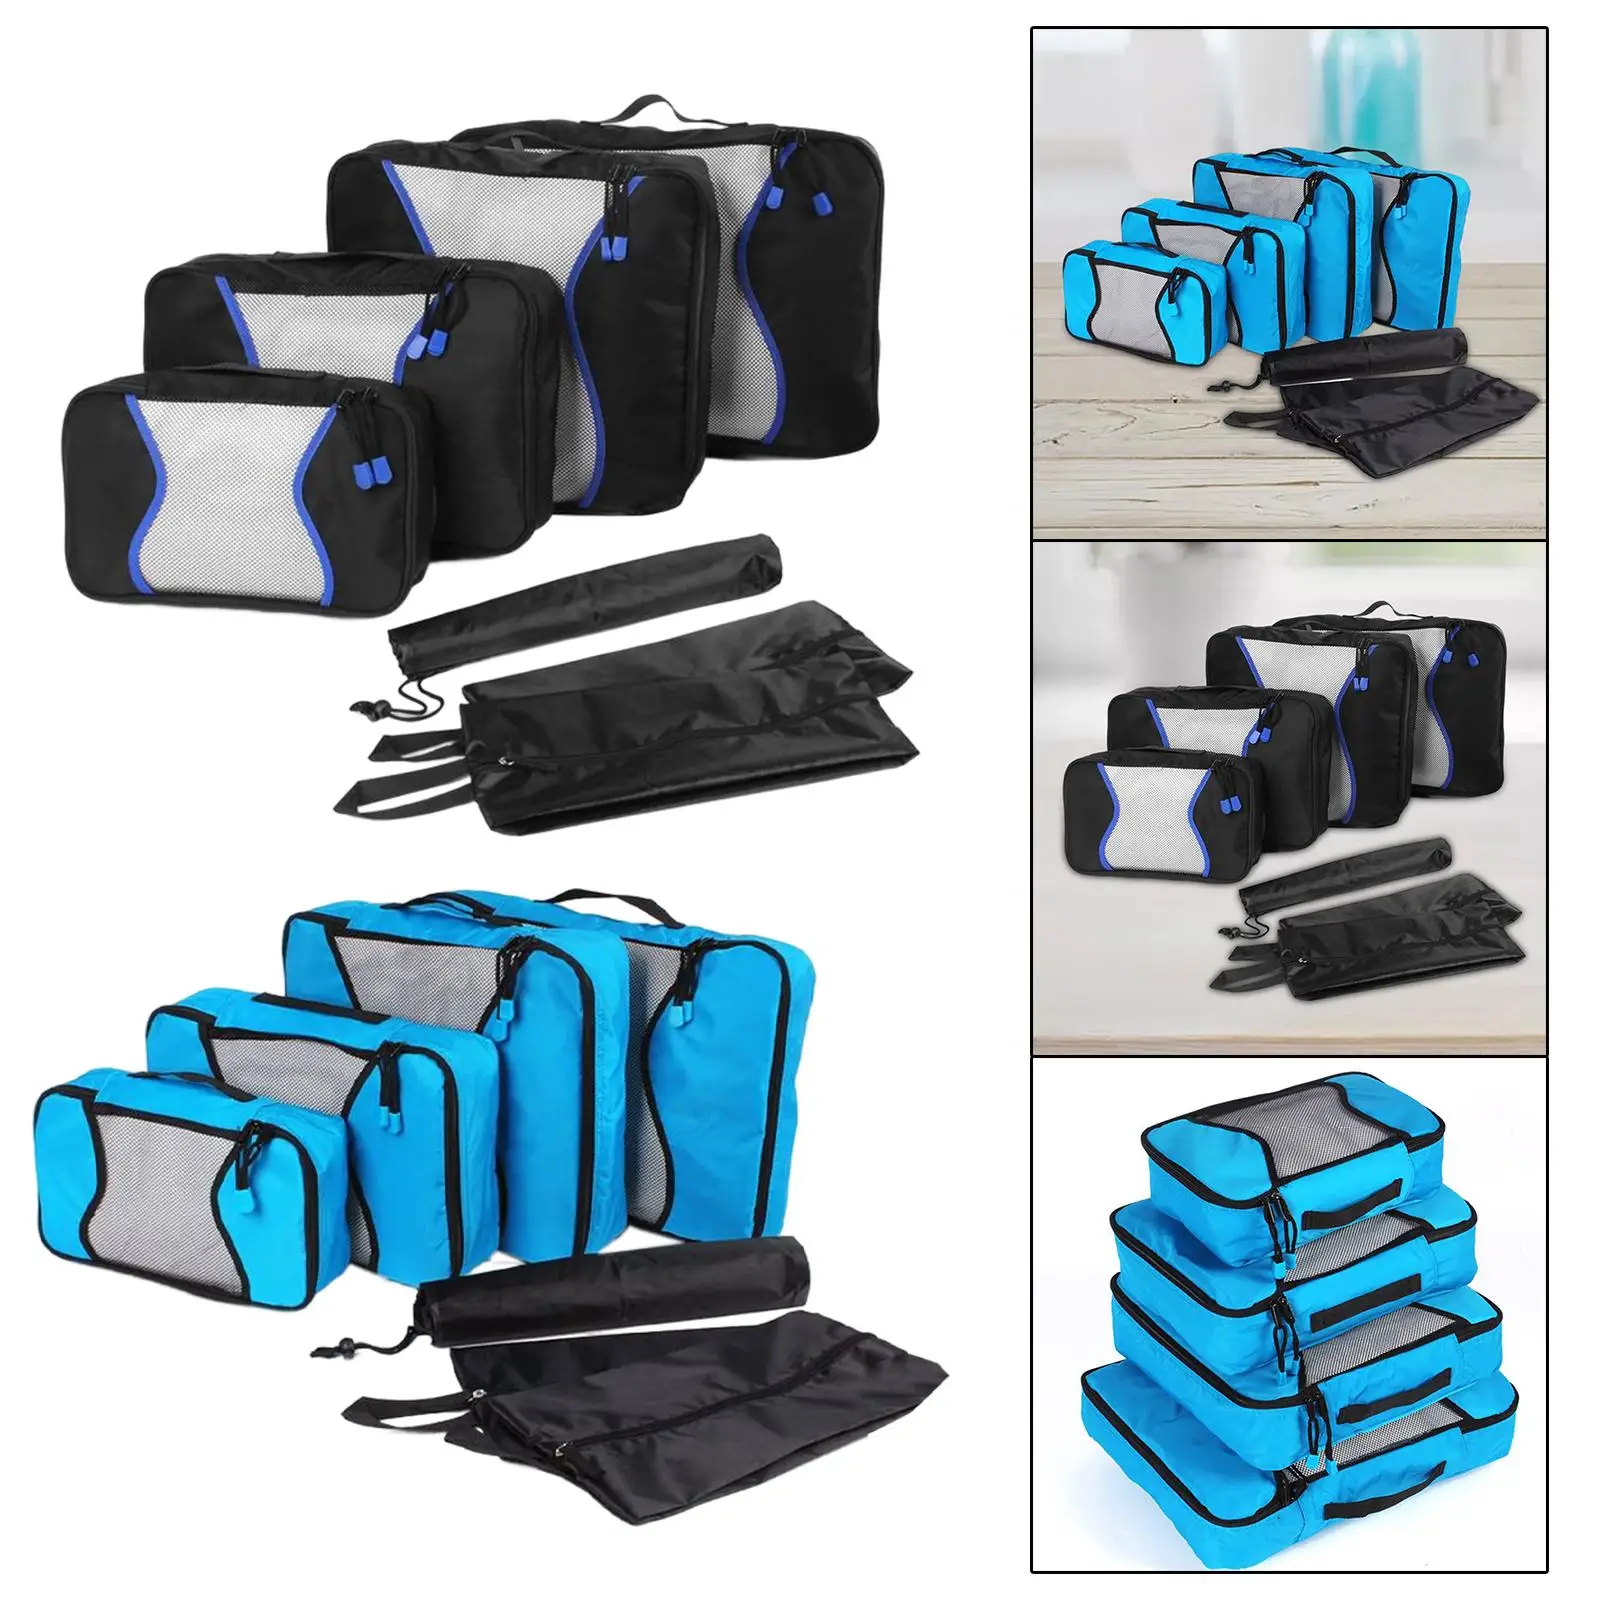 7 in 1 Packing Cubes Accessories Suitcase Bag Carry On Luggage Lightweight for Clothes Woman Man Keeping Organized